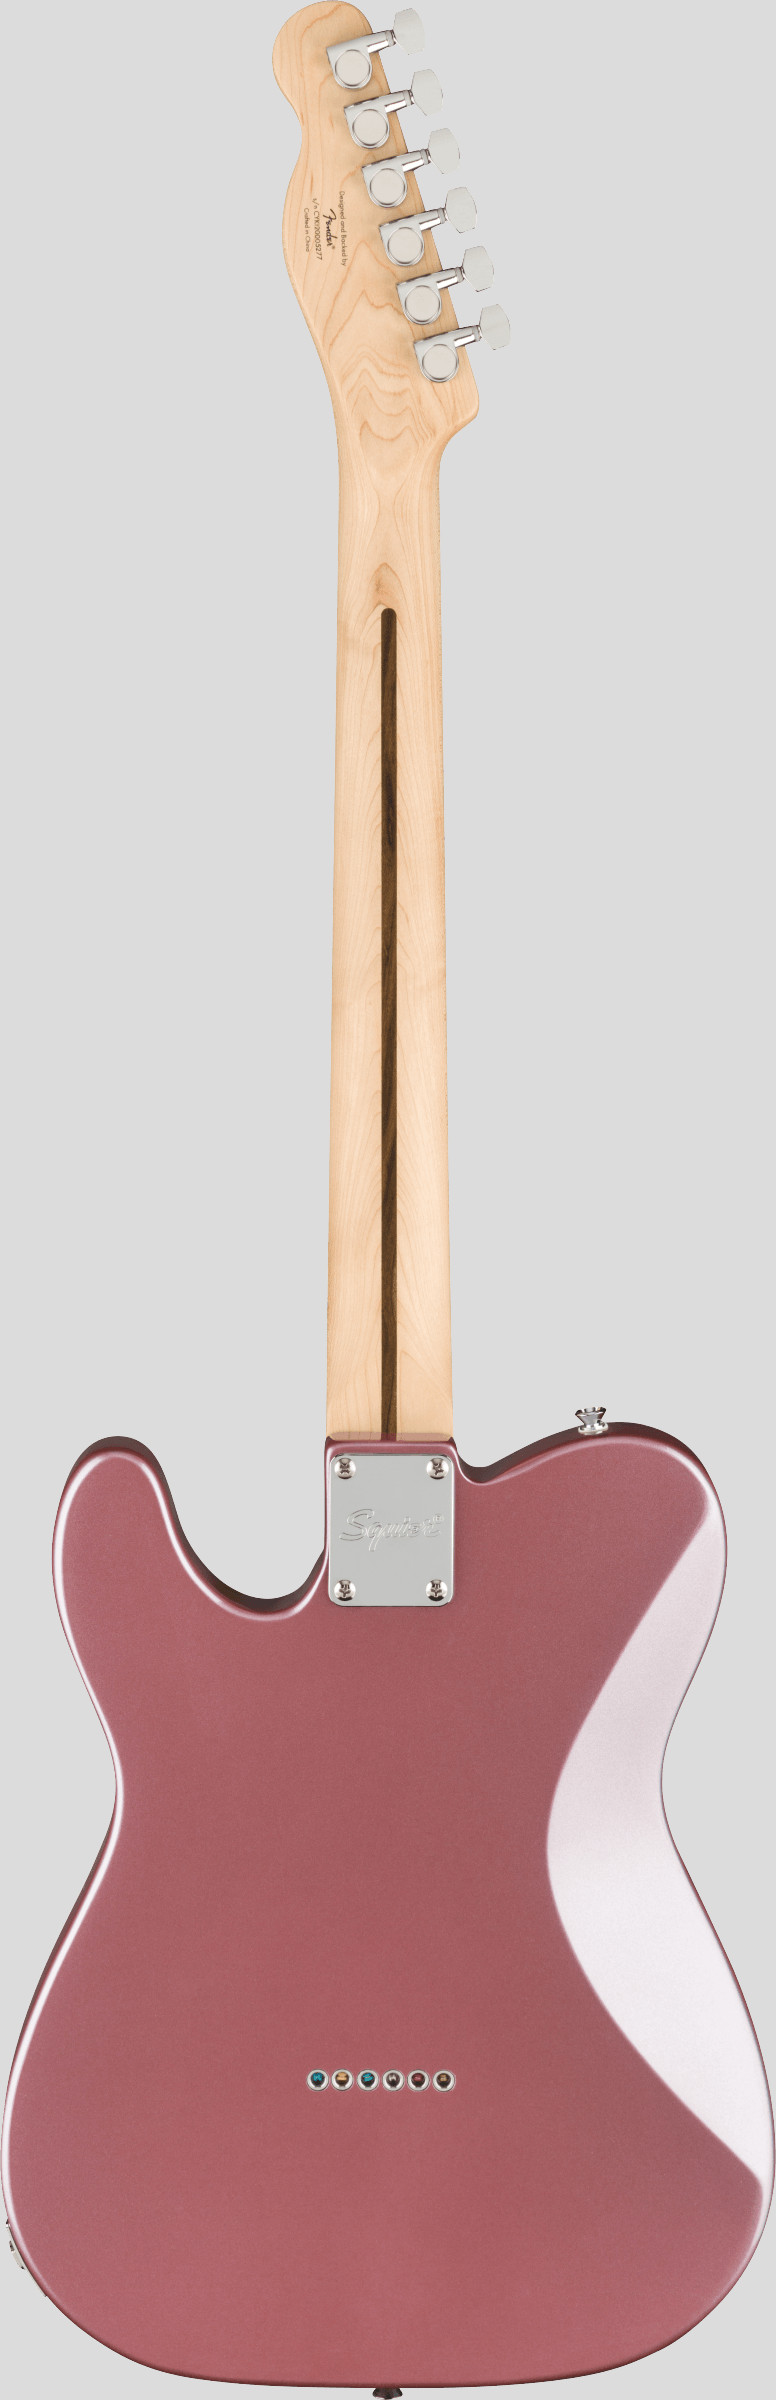 Squier by Fender Affinity Telecaster Deluxe Burgundy Mist 2